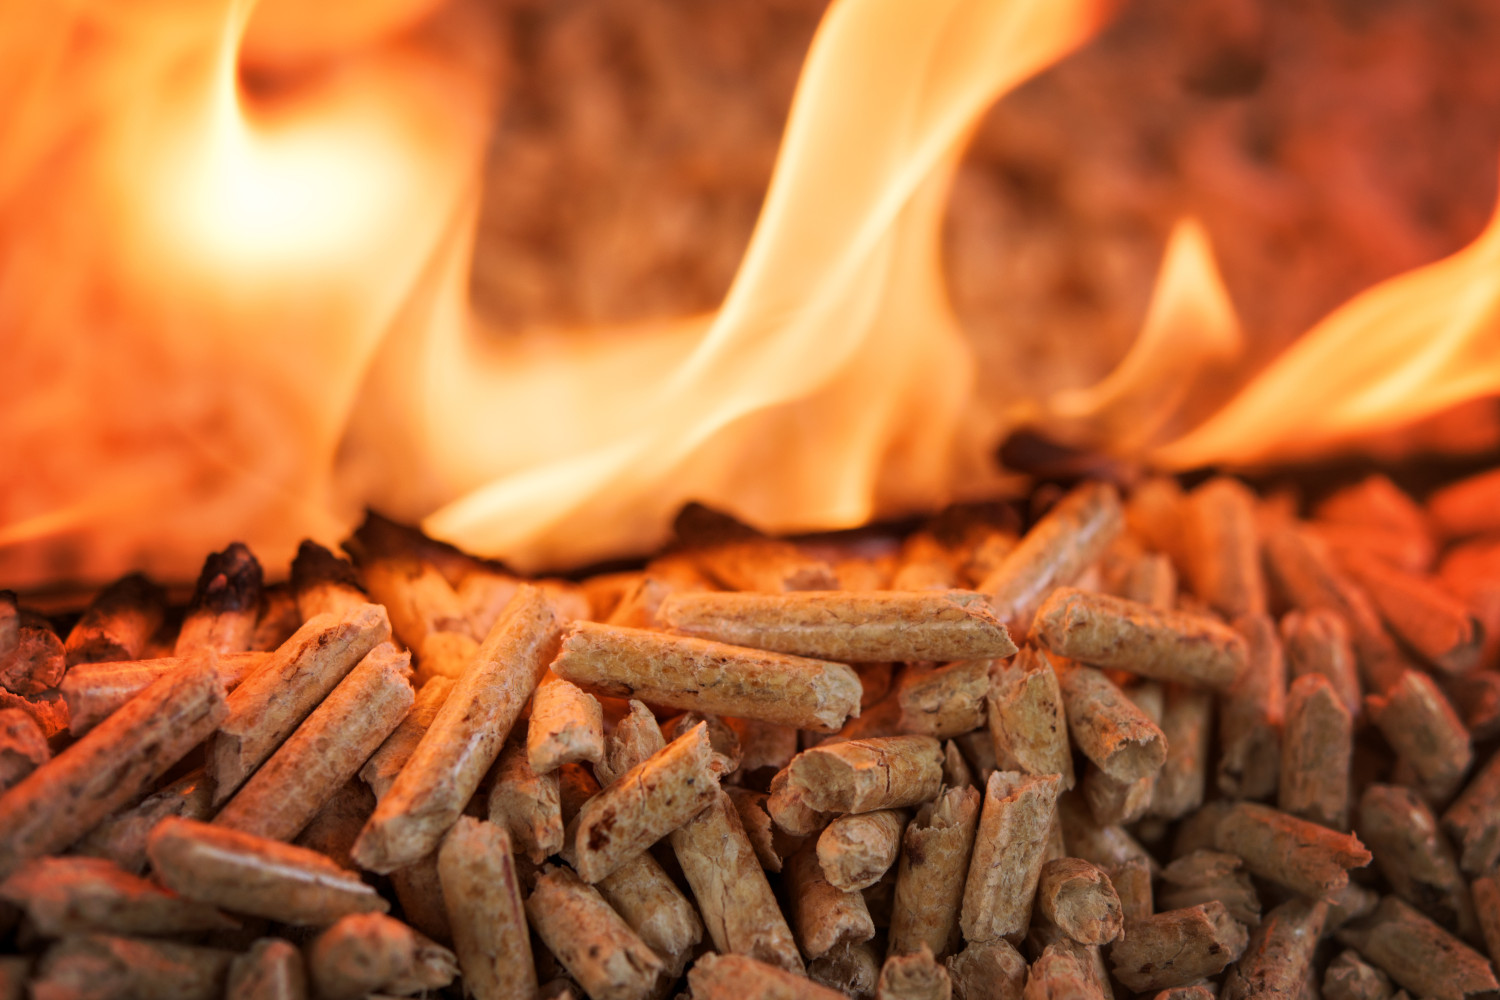 close-up of a pile of wood biomass pellets in flames